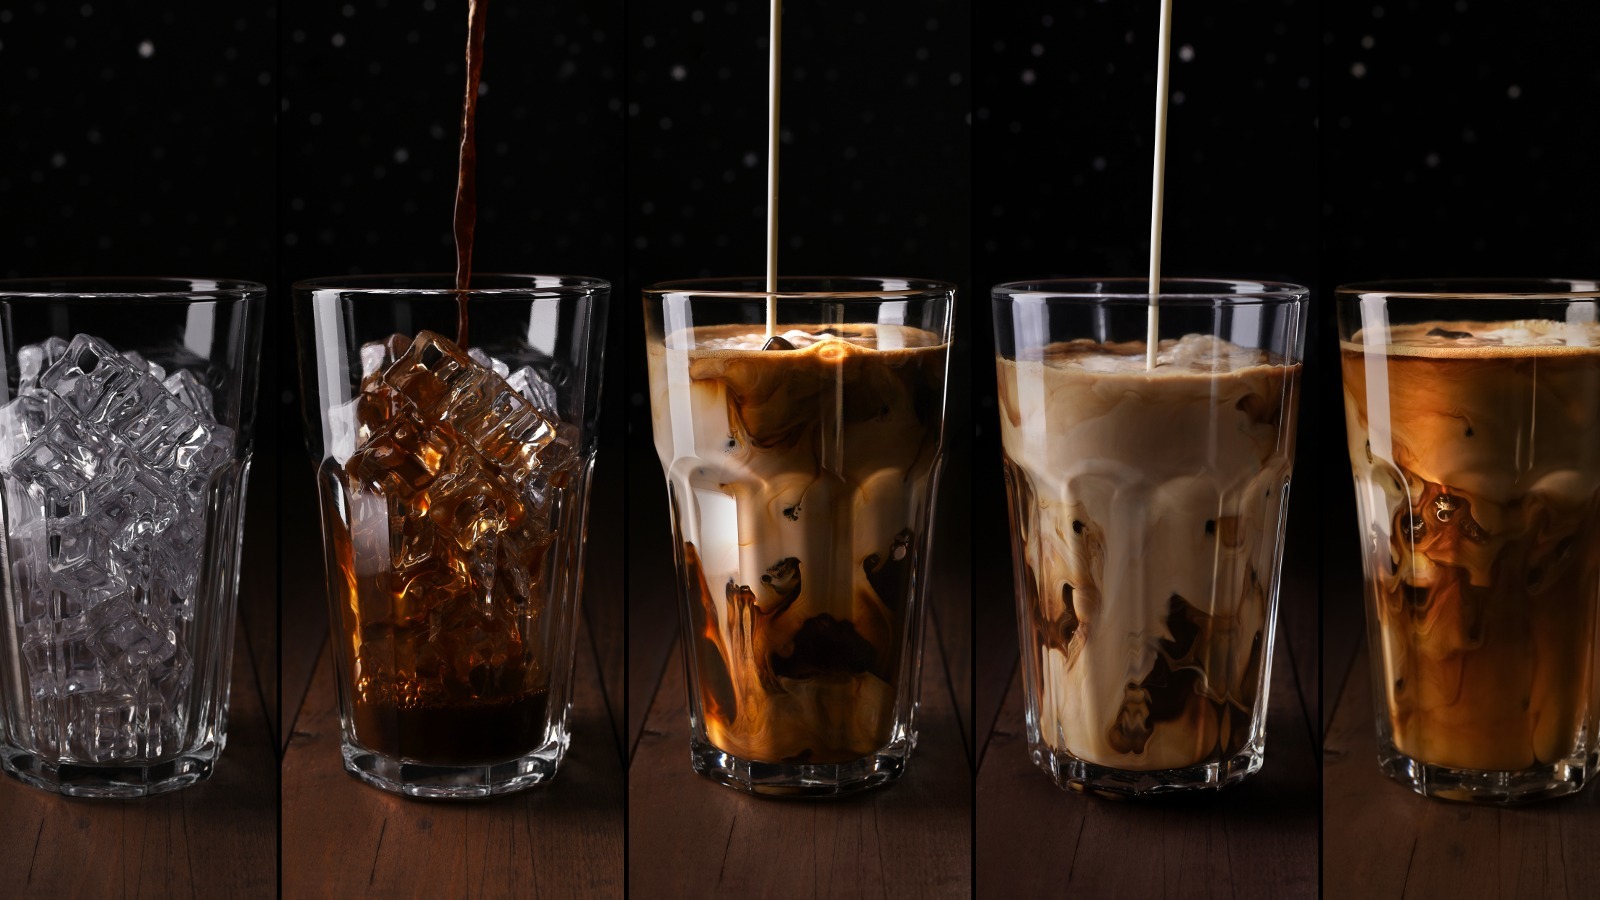 https://www.tastingtable.com/img/gallery/15-boozy-additions-to-spike-your-iced-coffee/l-intro-1686852694.jpg